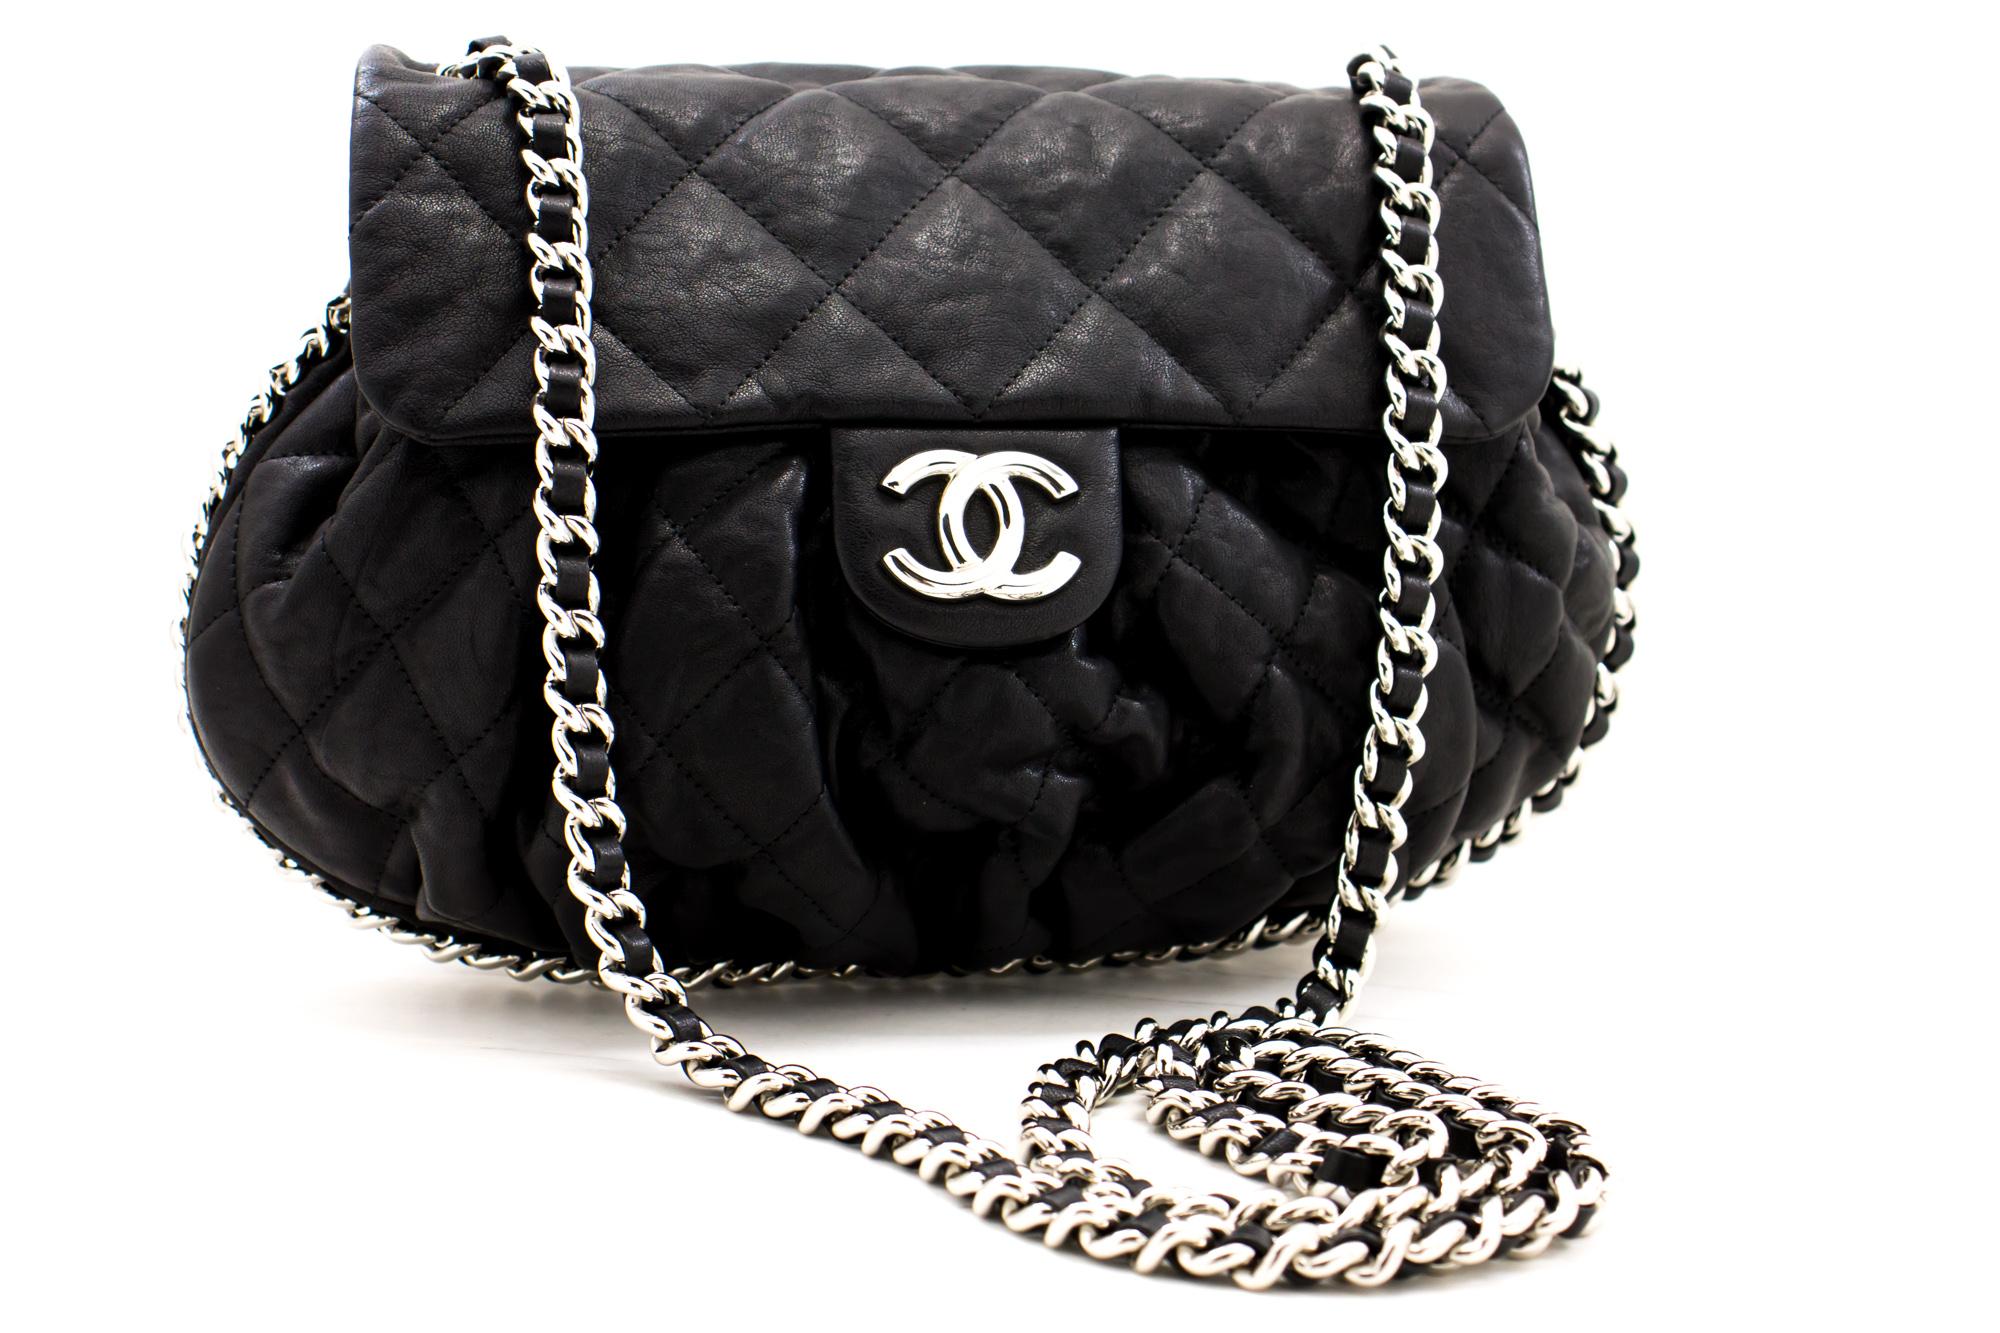 An authentic CHANEL Chain Around Shoulder Bag Crossbody Black Calfskin Leather. The color is Black. The outside material is Leather. The pattern is Solid. This item is Contemporary. The year of manufacture would be 2015.
Conditions & Ratings
Outside